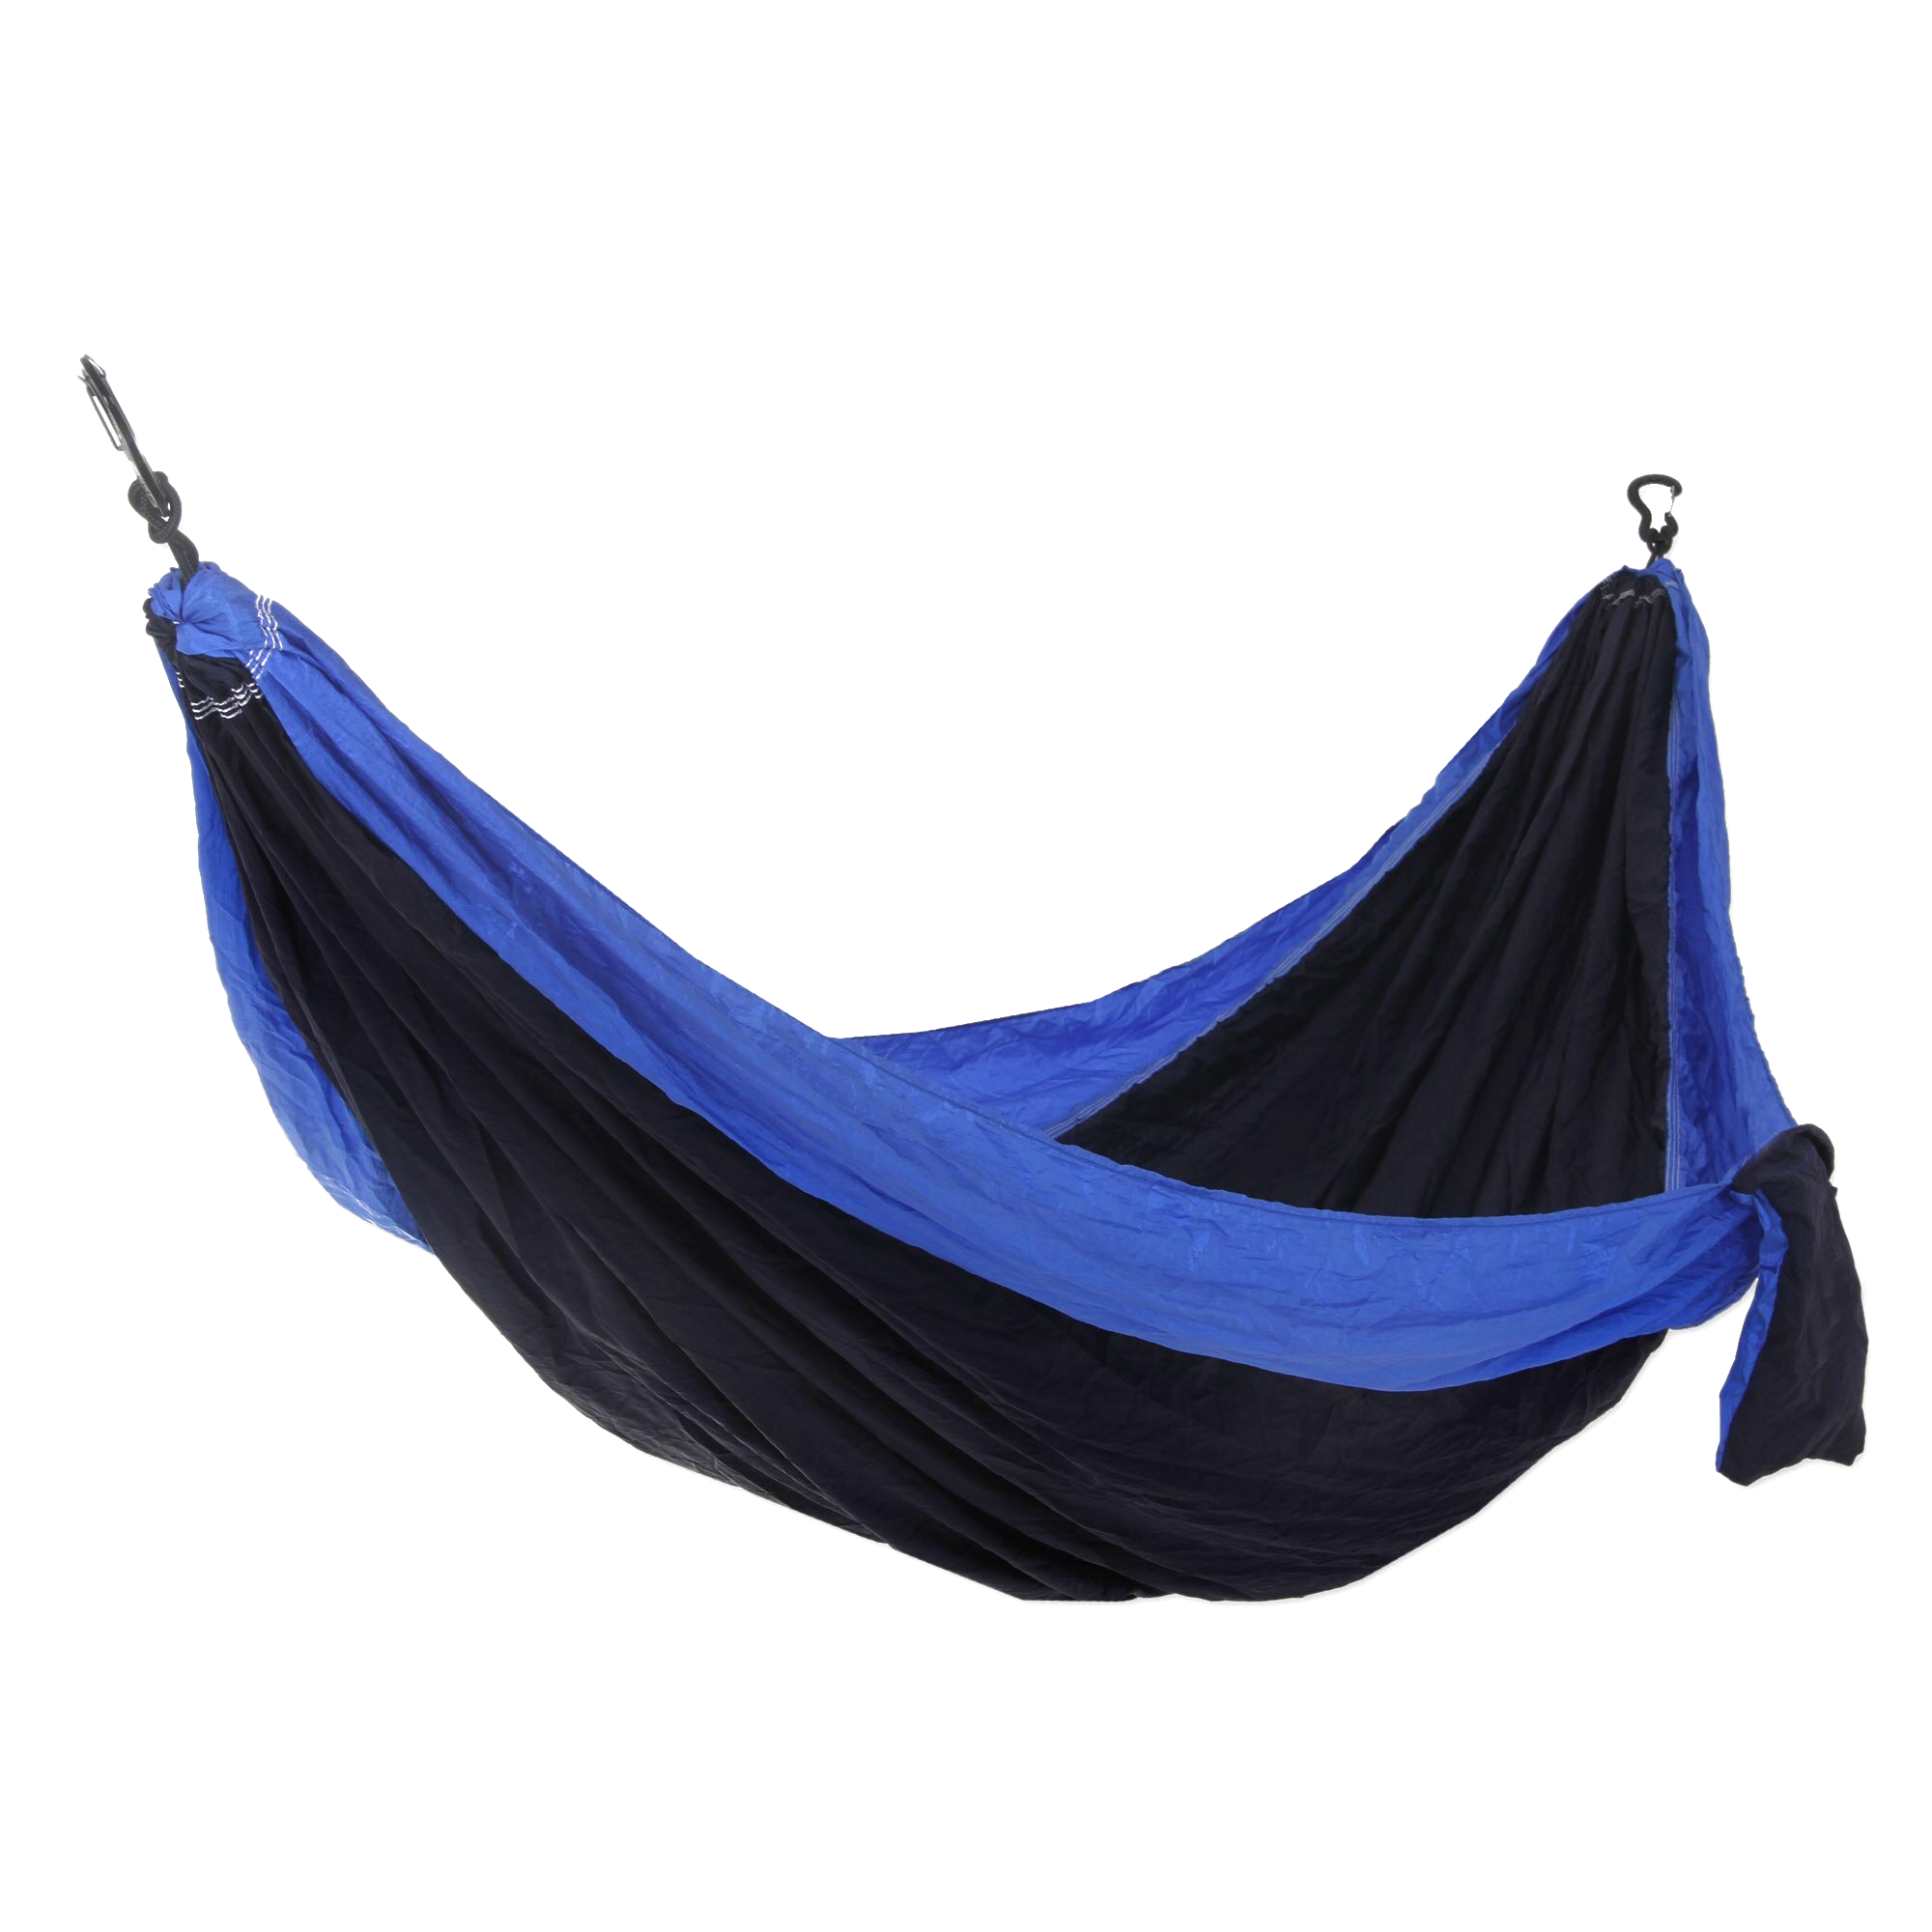 DOUBLE TRAVEL HAMMOCK WITH CARRY BAG